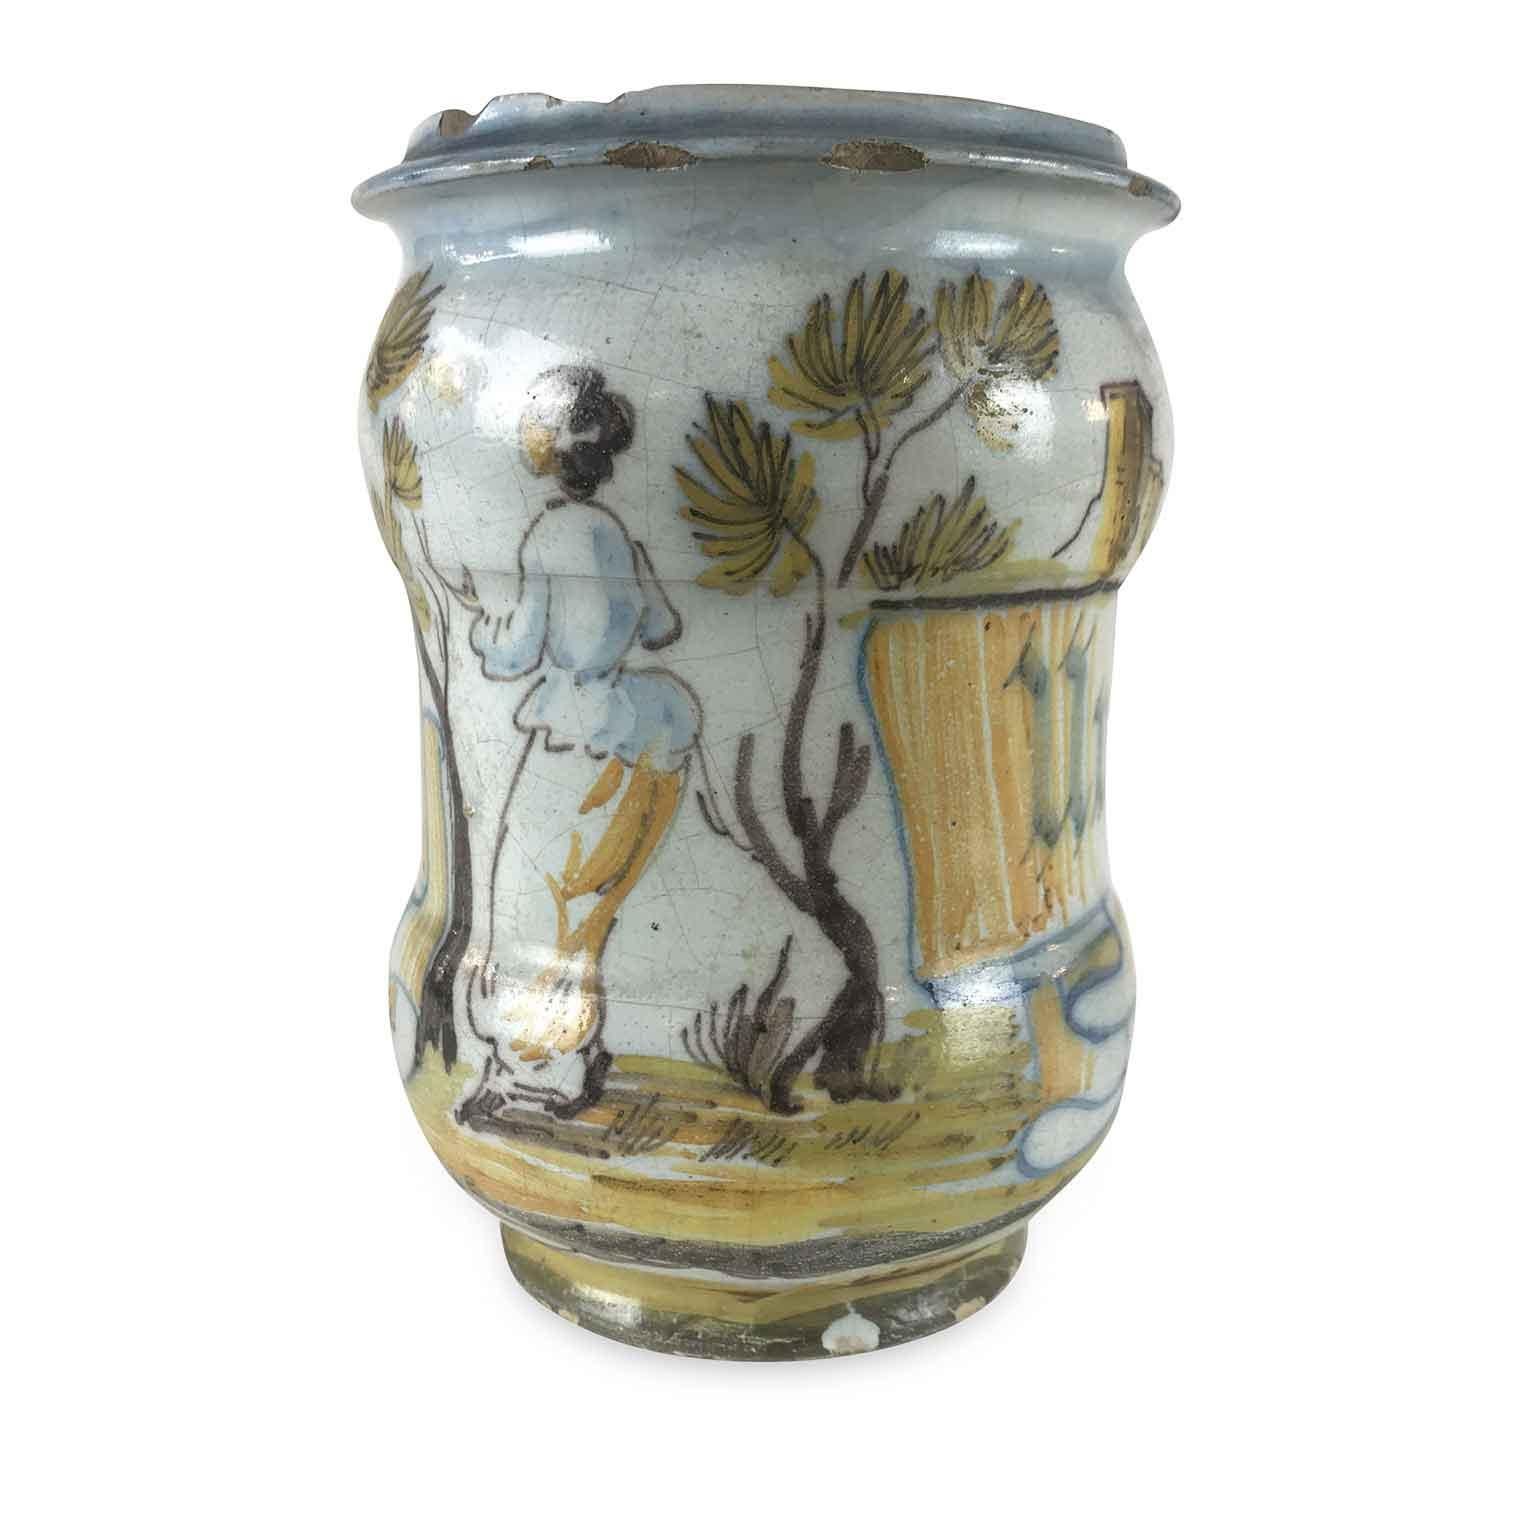 18th Century Italian Majolica Albarello Drug Jar by Jacques Boselly For Sale 2